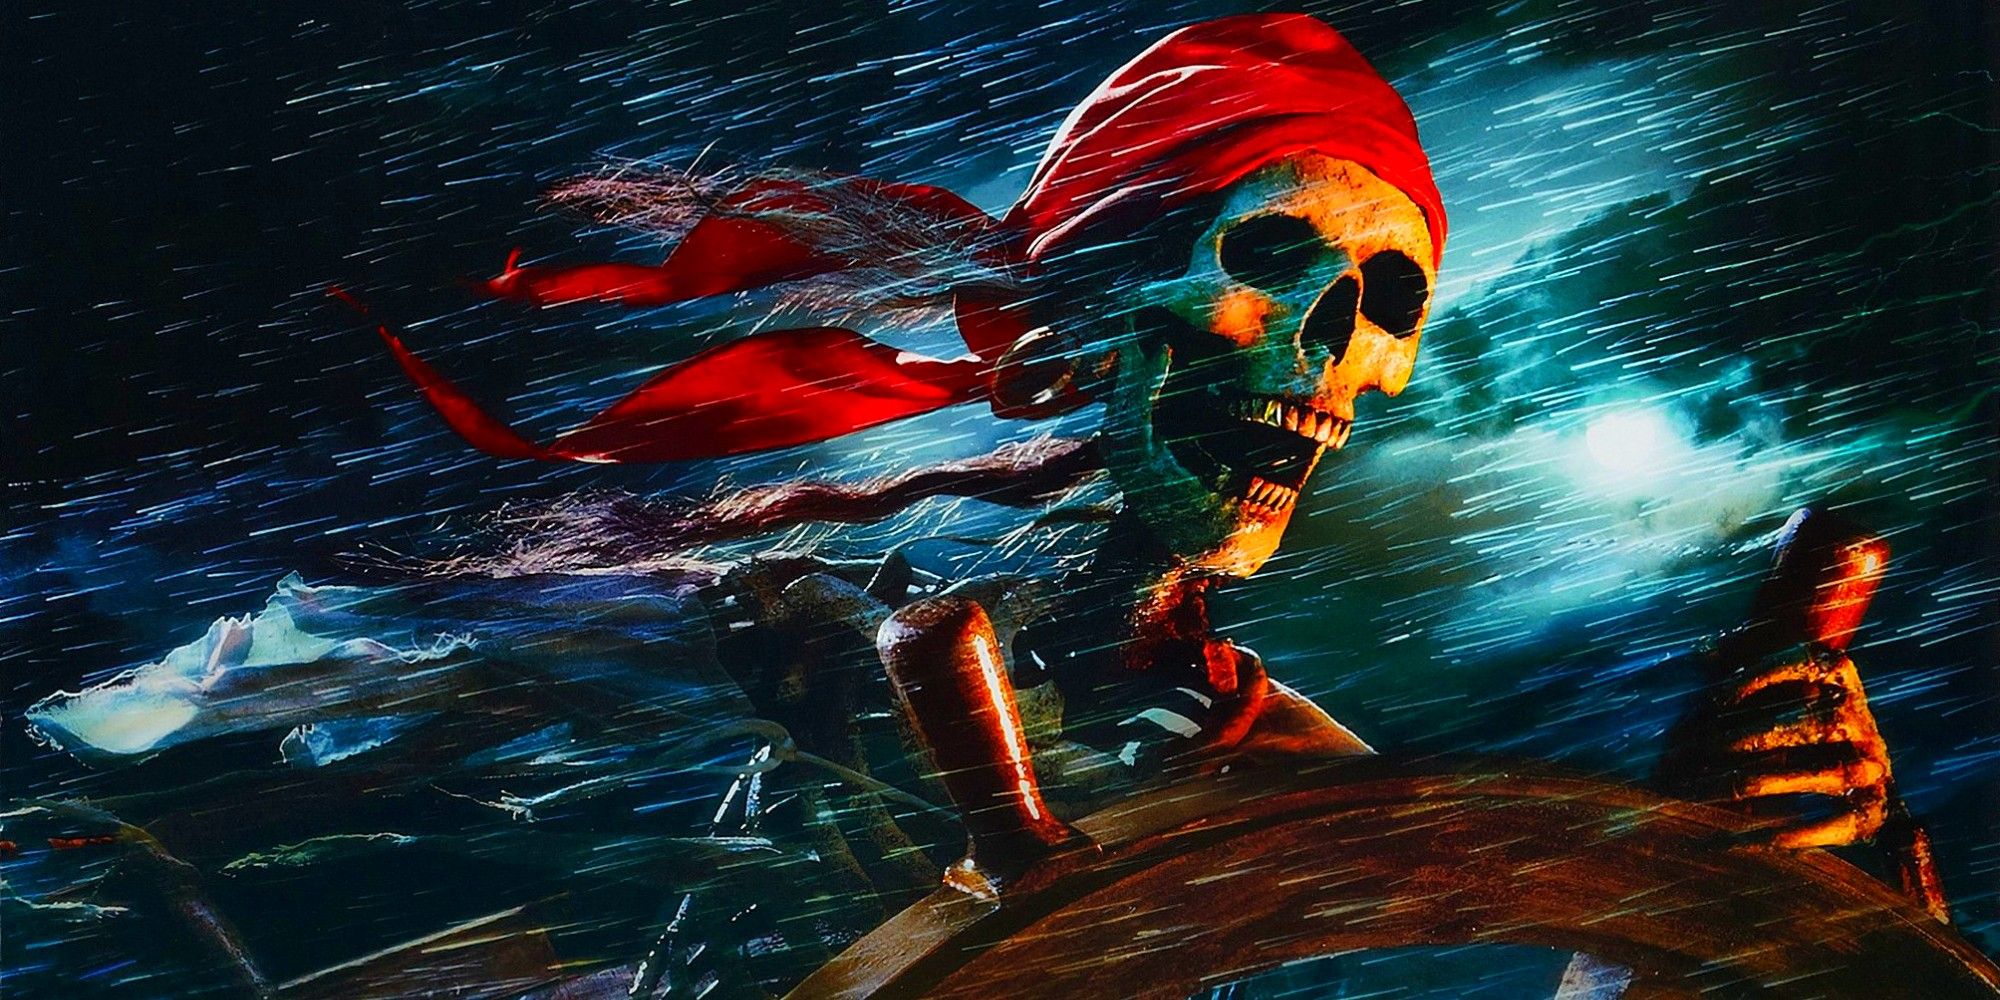 Pirates of the Caribbean Curse of the Black Pearl poster